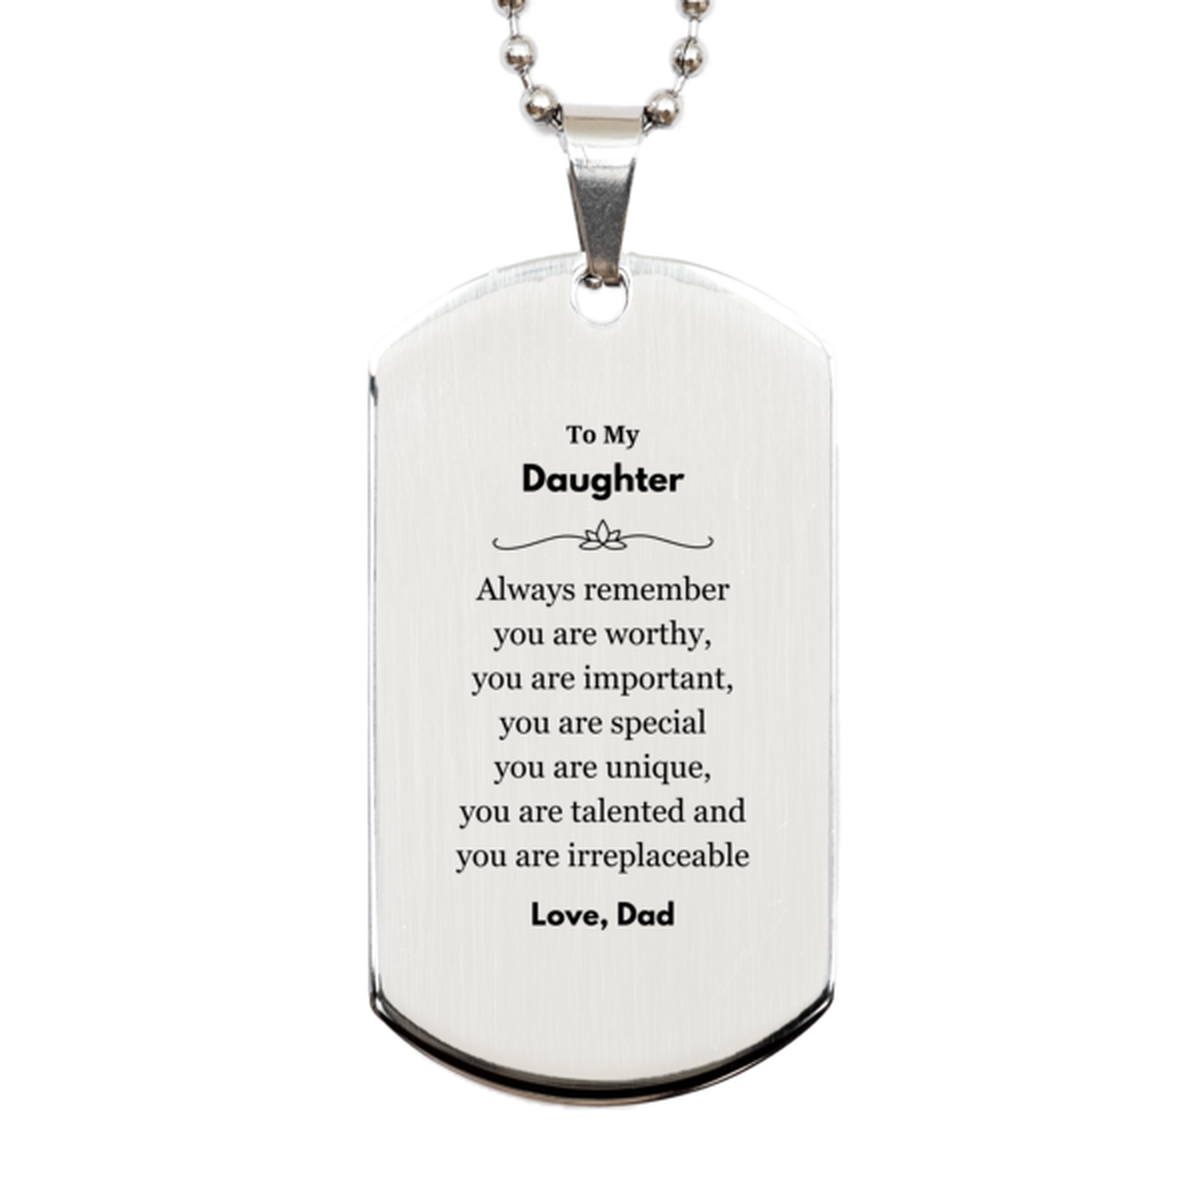 Daughter Birthday Gifts from Dad, Inspirational Silver Dog Tag for Daughter Christmas Graduation Gifts for Daughter Always remember you are worthy, you are important. Love, Dad